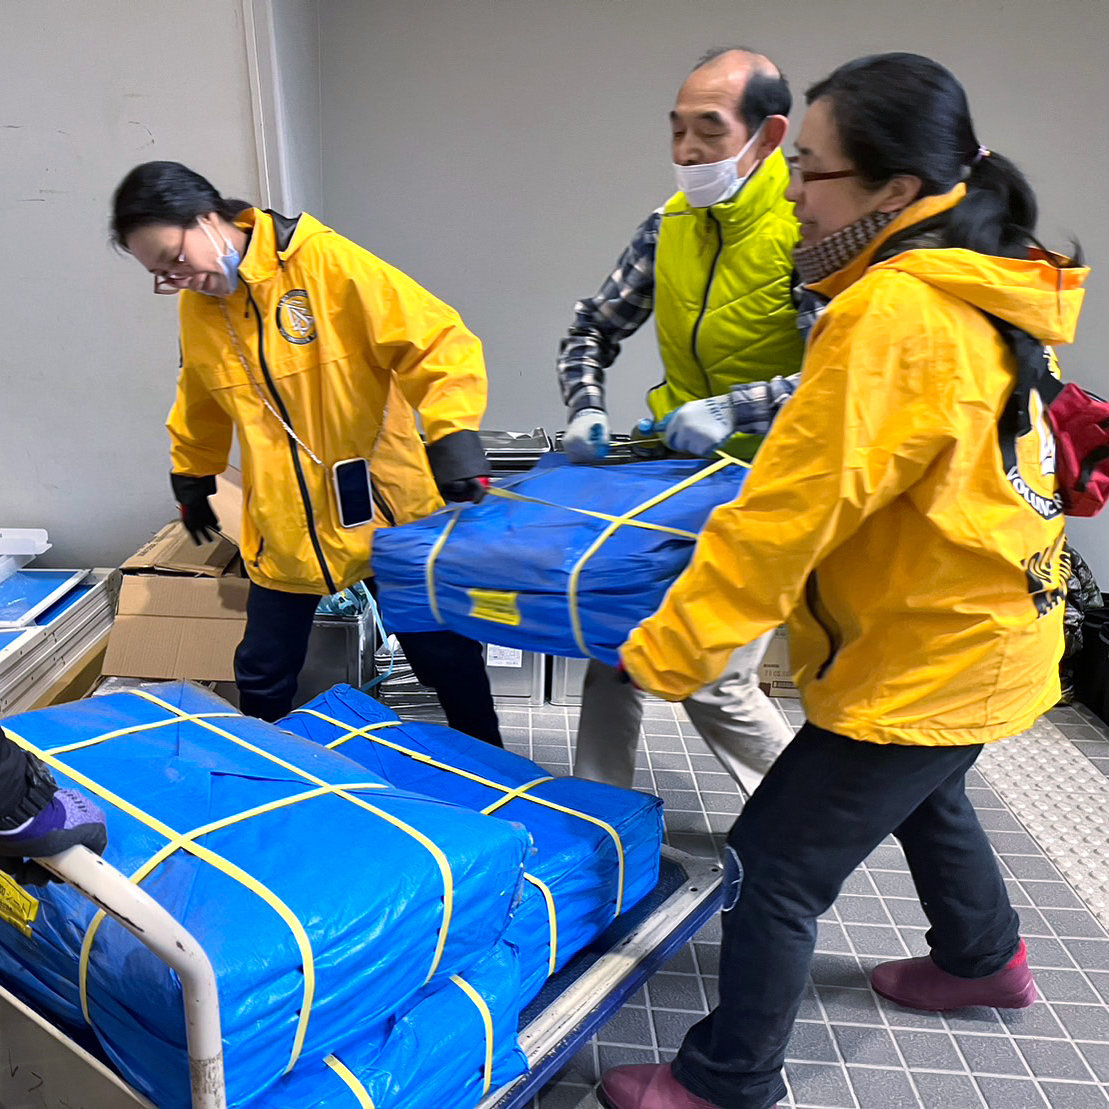 A team of more than 20 VMs from Tokyo helped thousands of people in evacuation centers in Himi and Nanao cities, two of the worst hit areas, by setting up temporary bedding, preparing hot meals and delivering assists to evacuees and staff.